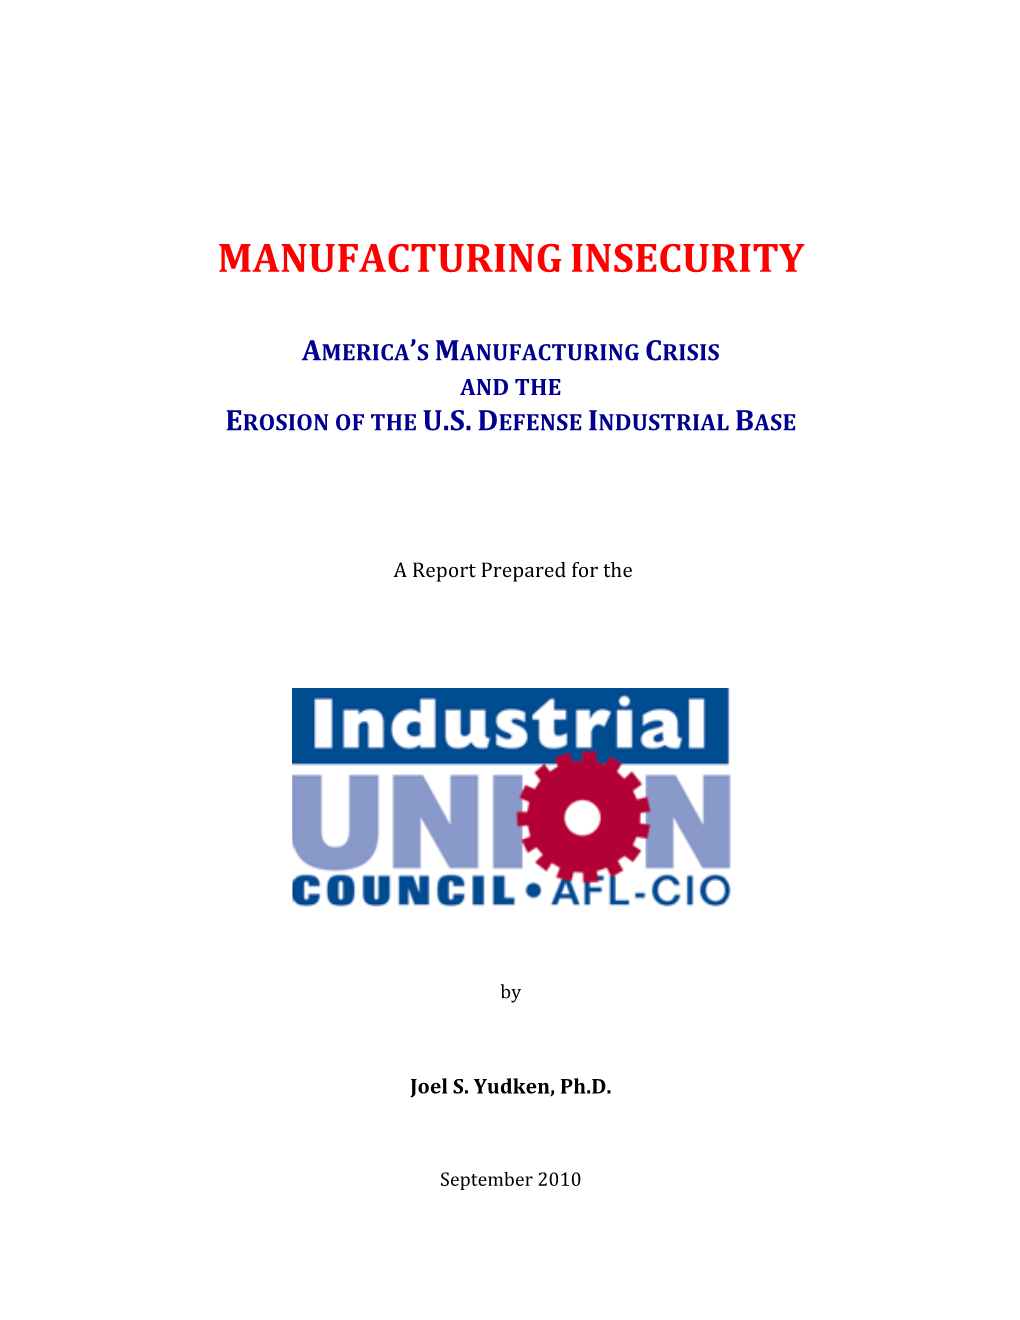 Manufacturing Insecurity